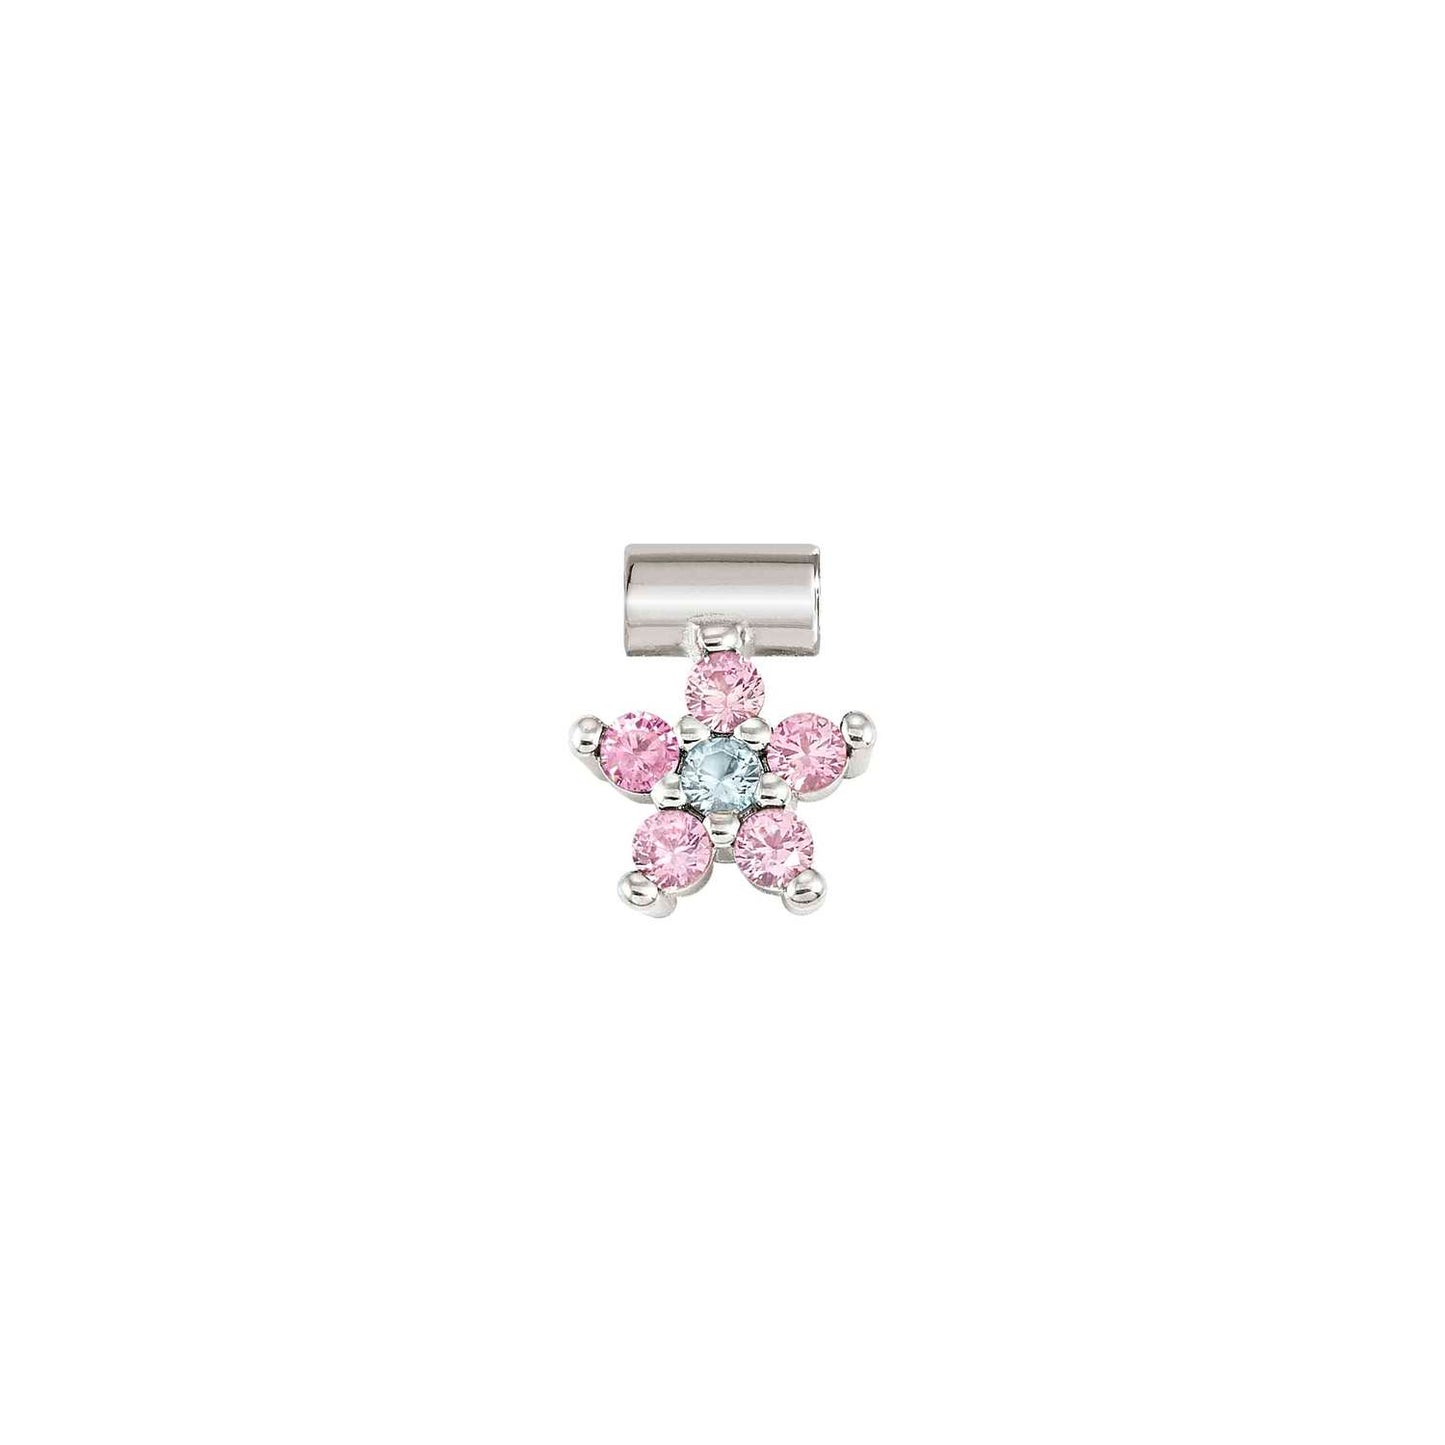 SEIMIA ed, FLORA in 925 sterling silver and cz (FLOWERS) (006_PINK)